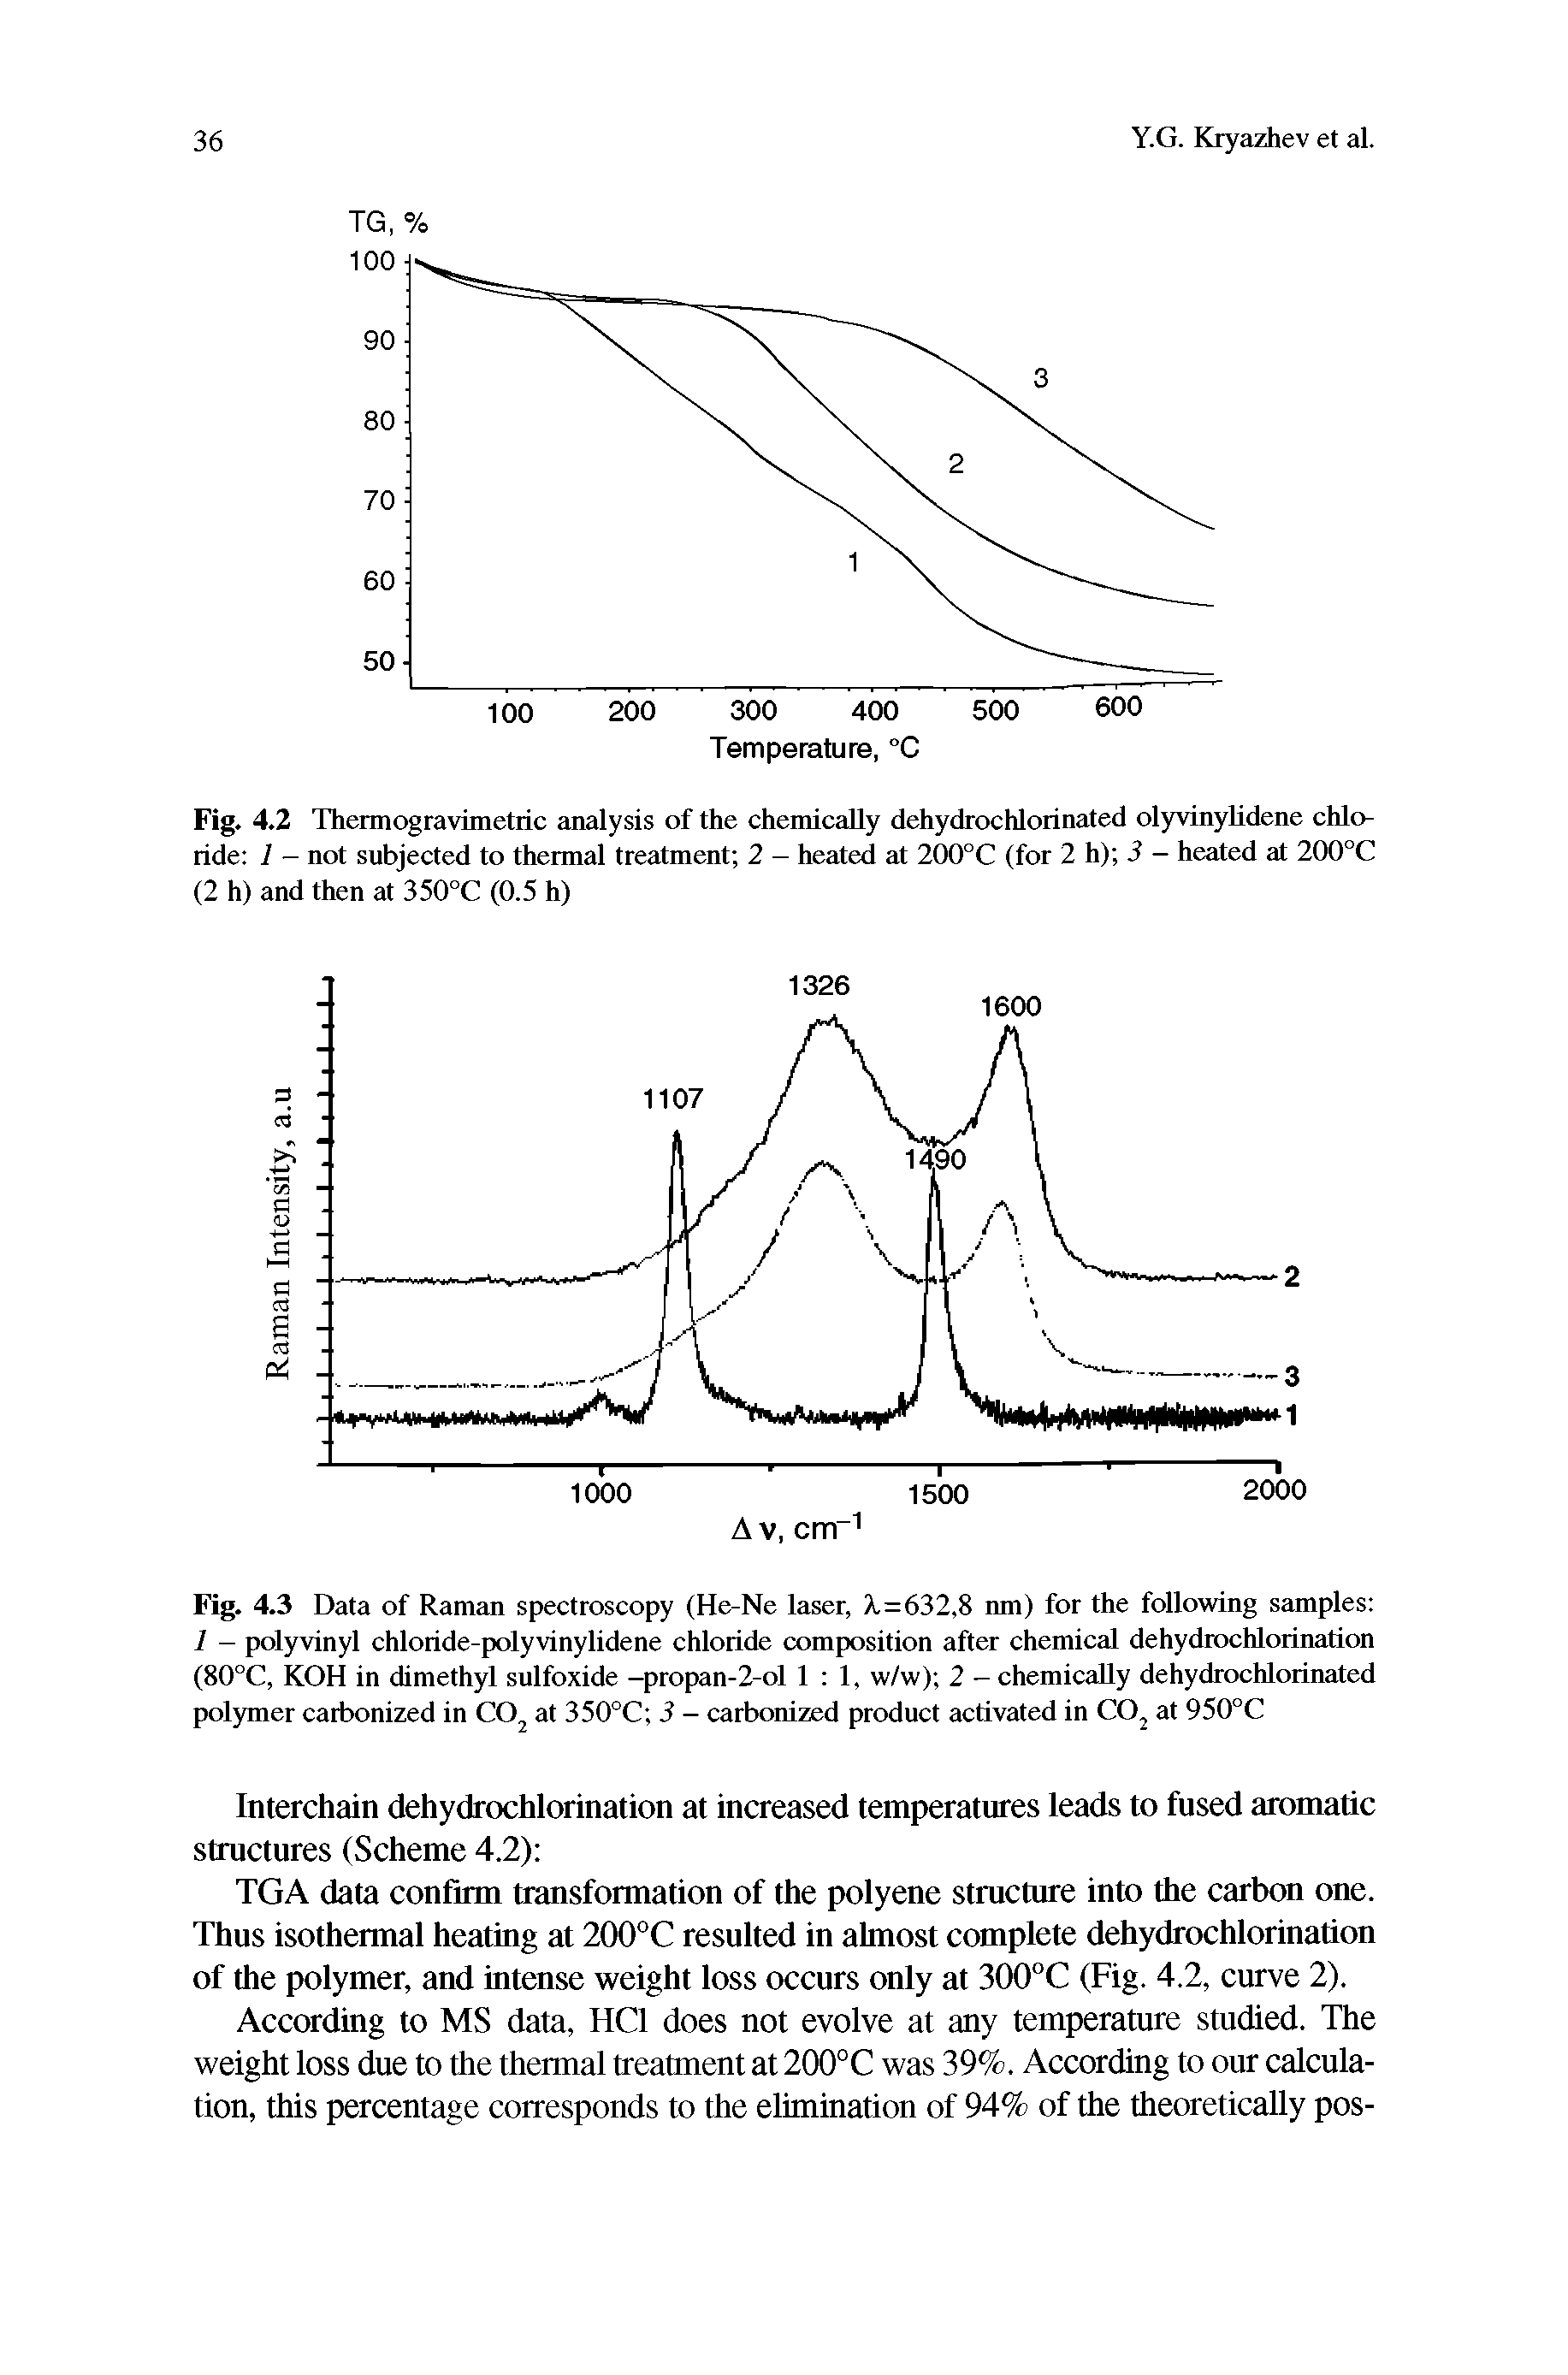 Fig. 4.3 Data of Raman spectroscopy (He-Ne laser, A,=632,8 nm) for the following samples 1 - polyvinyl chloride-polyvinylidene chloride composition after chemical dehydrochlorination (80°C, KOH in dimethyl sulfoxide -propan-2-ol 1 1, w/w) 2 - chemically dehydrochlorinated polymer carbonized in CO at 350°C 3 - carbonized product activated in CO at 950°C...